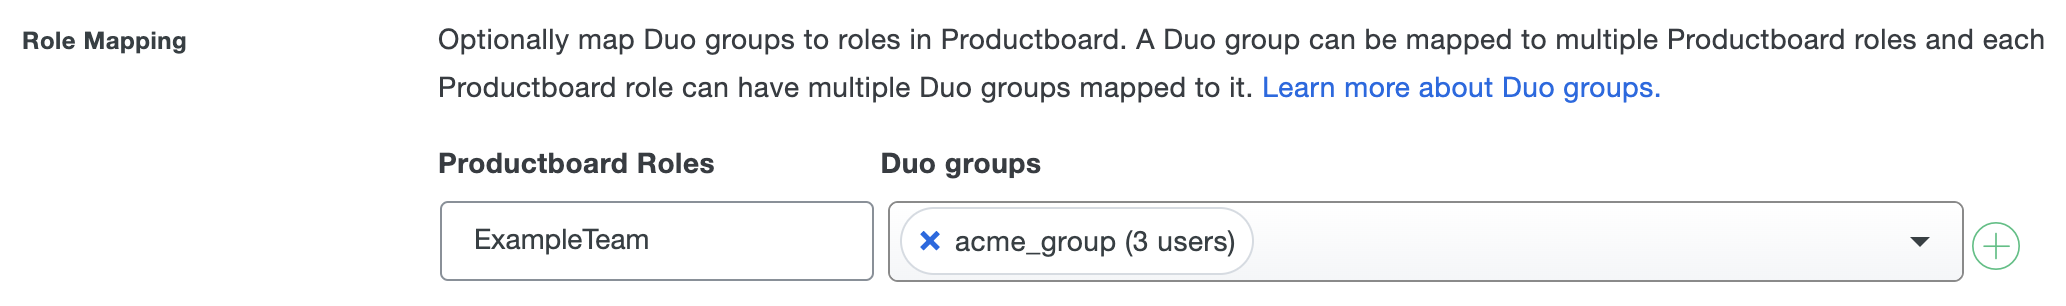 Duo Productboard Group Mapping Fields